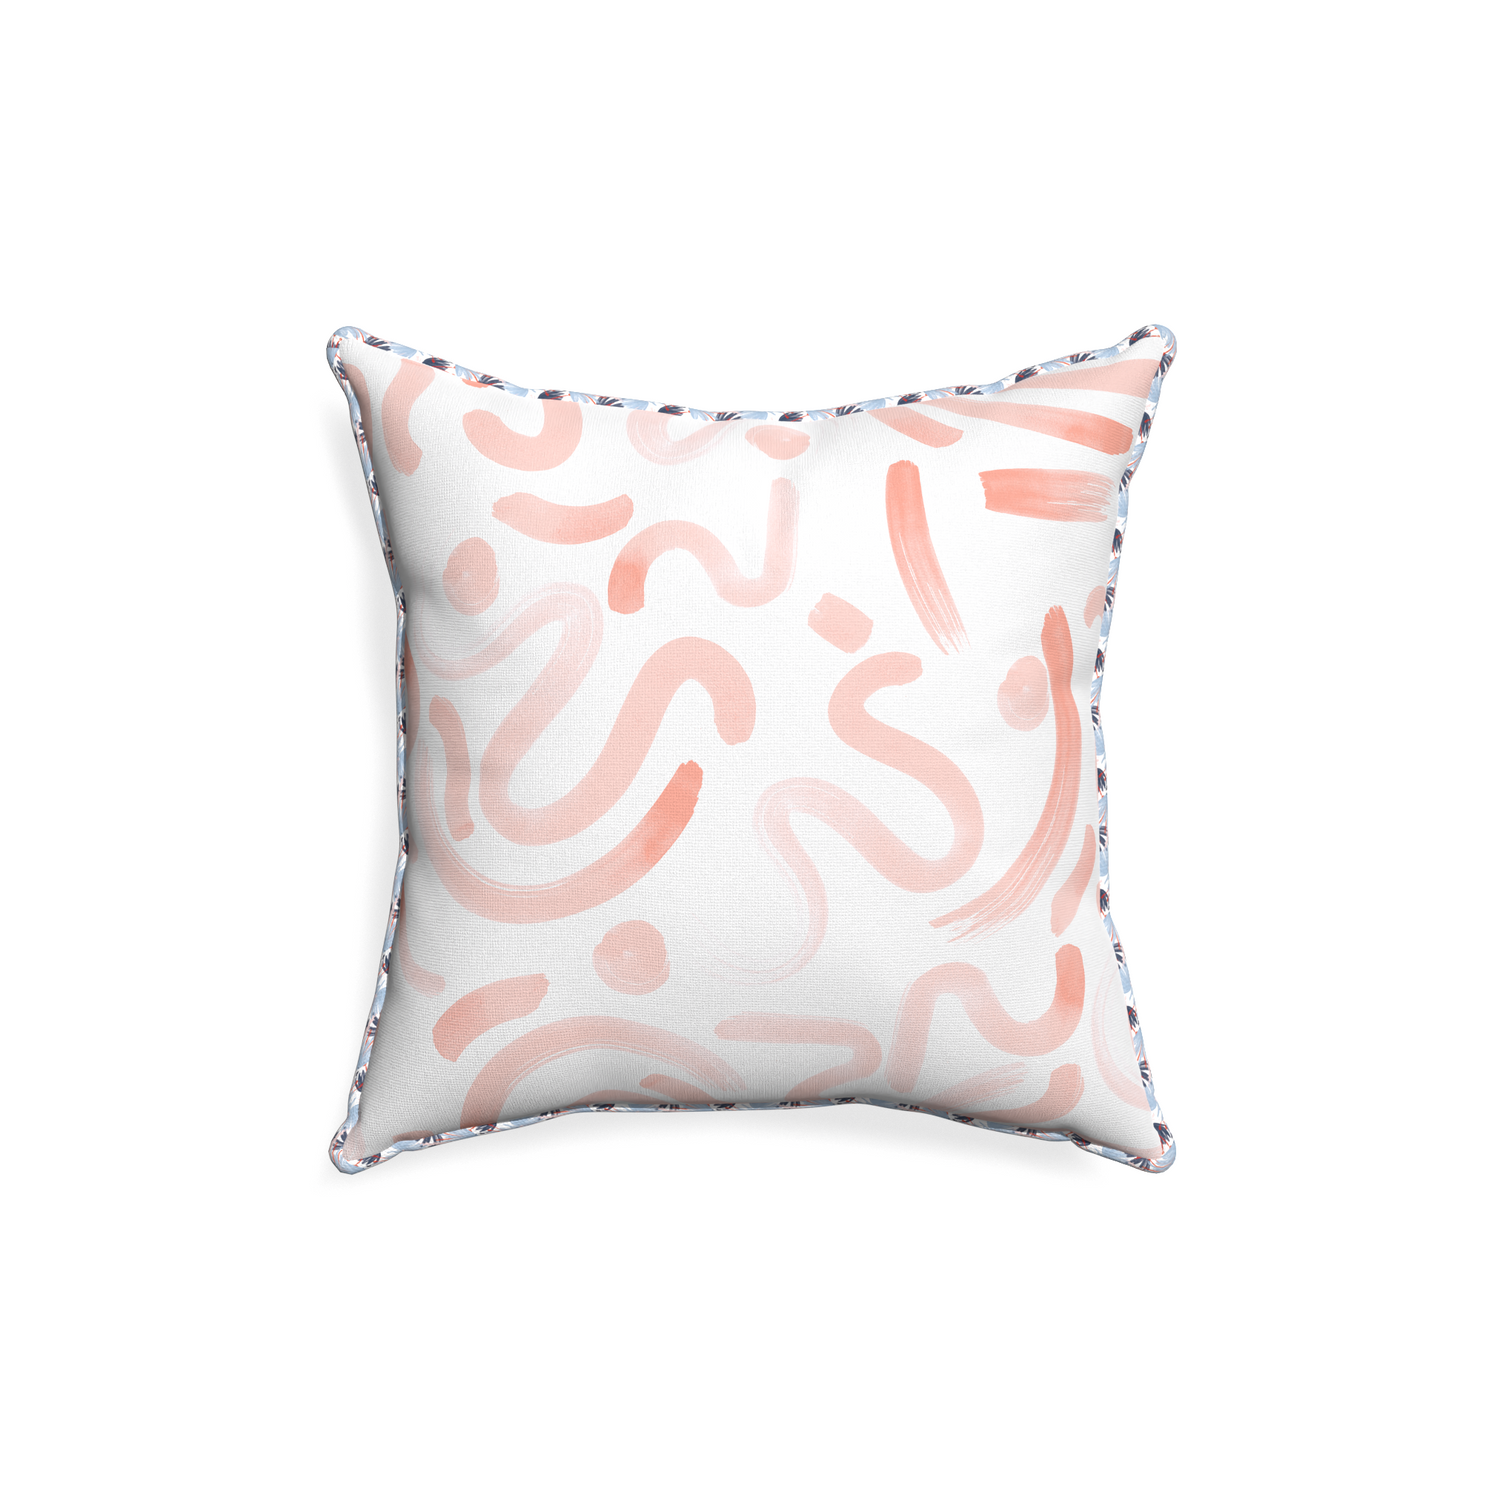 18-square hockney pink custom pillow with e piping on white background